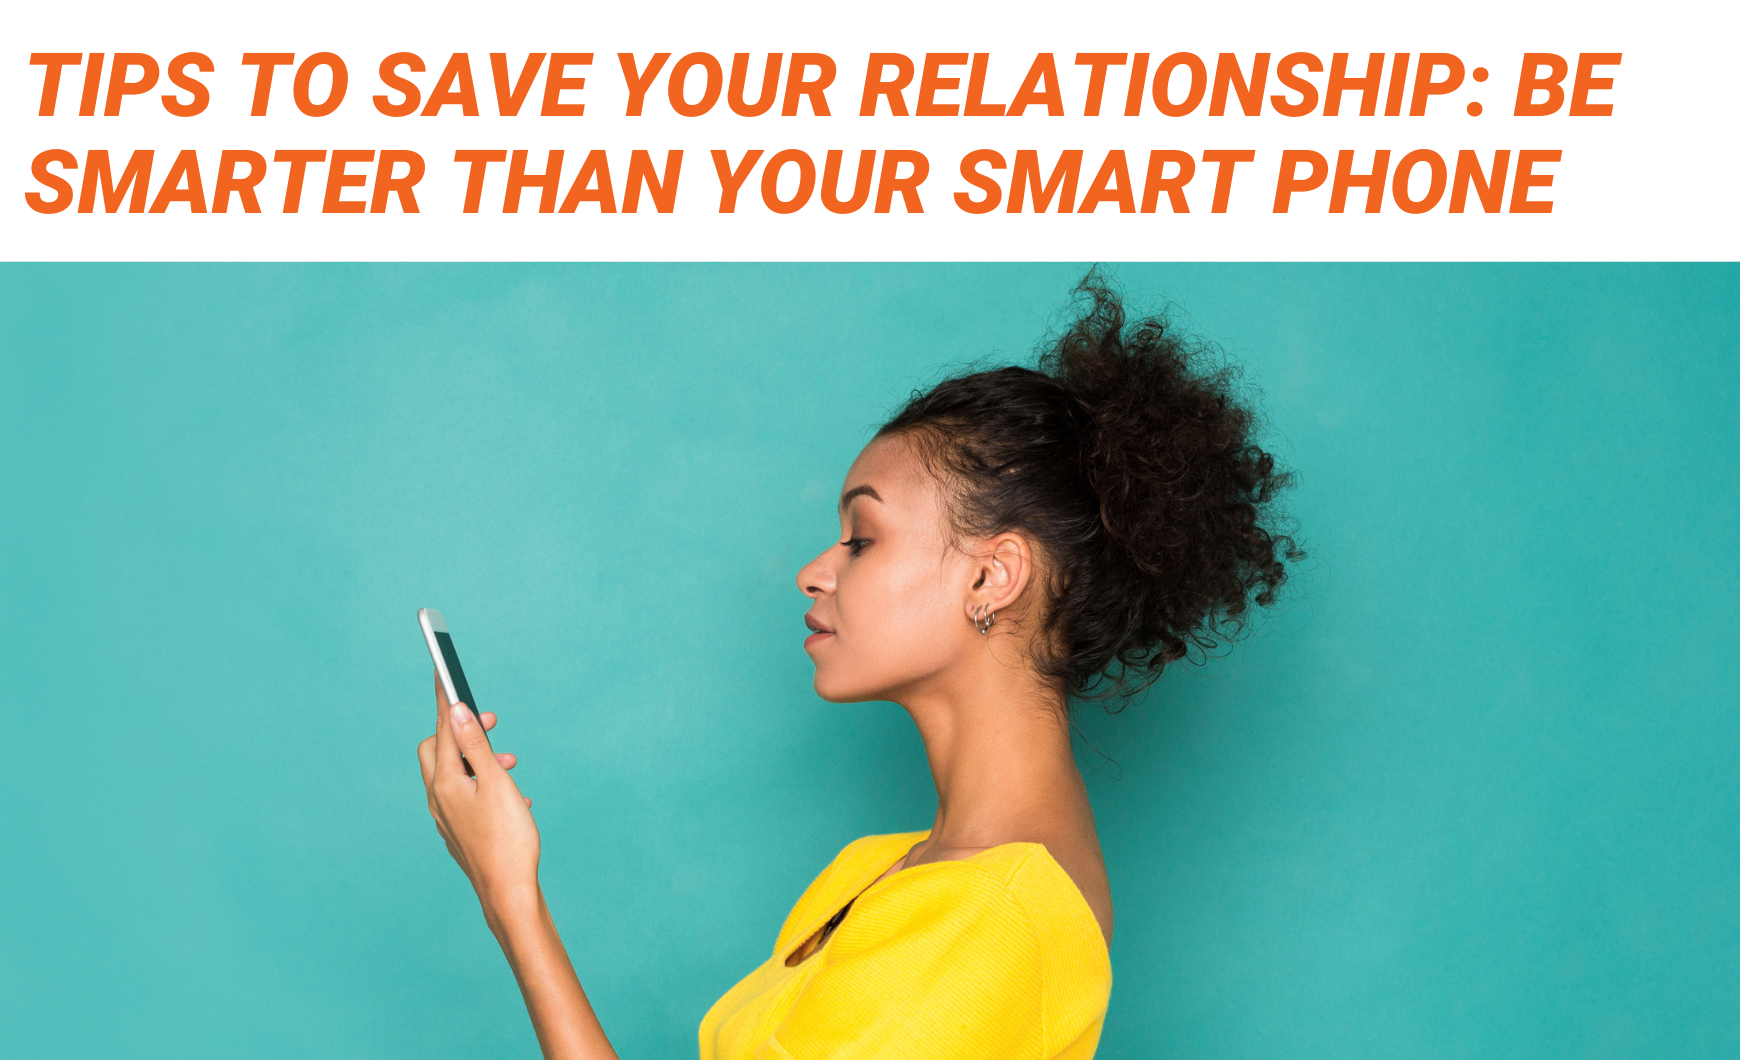 Orange text on a white background that reads "Tips to Save Your Relationship: Be Smarter than your Smart Phone" above a photo of a Black woman standing to the side wearing a yellow dress, looking at her phone.